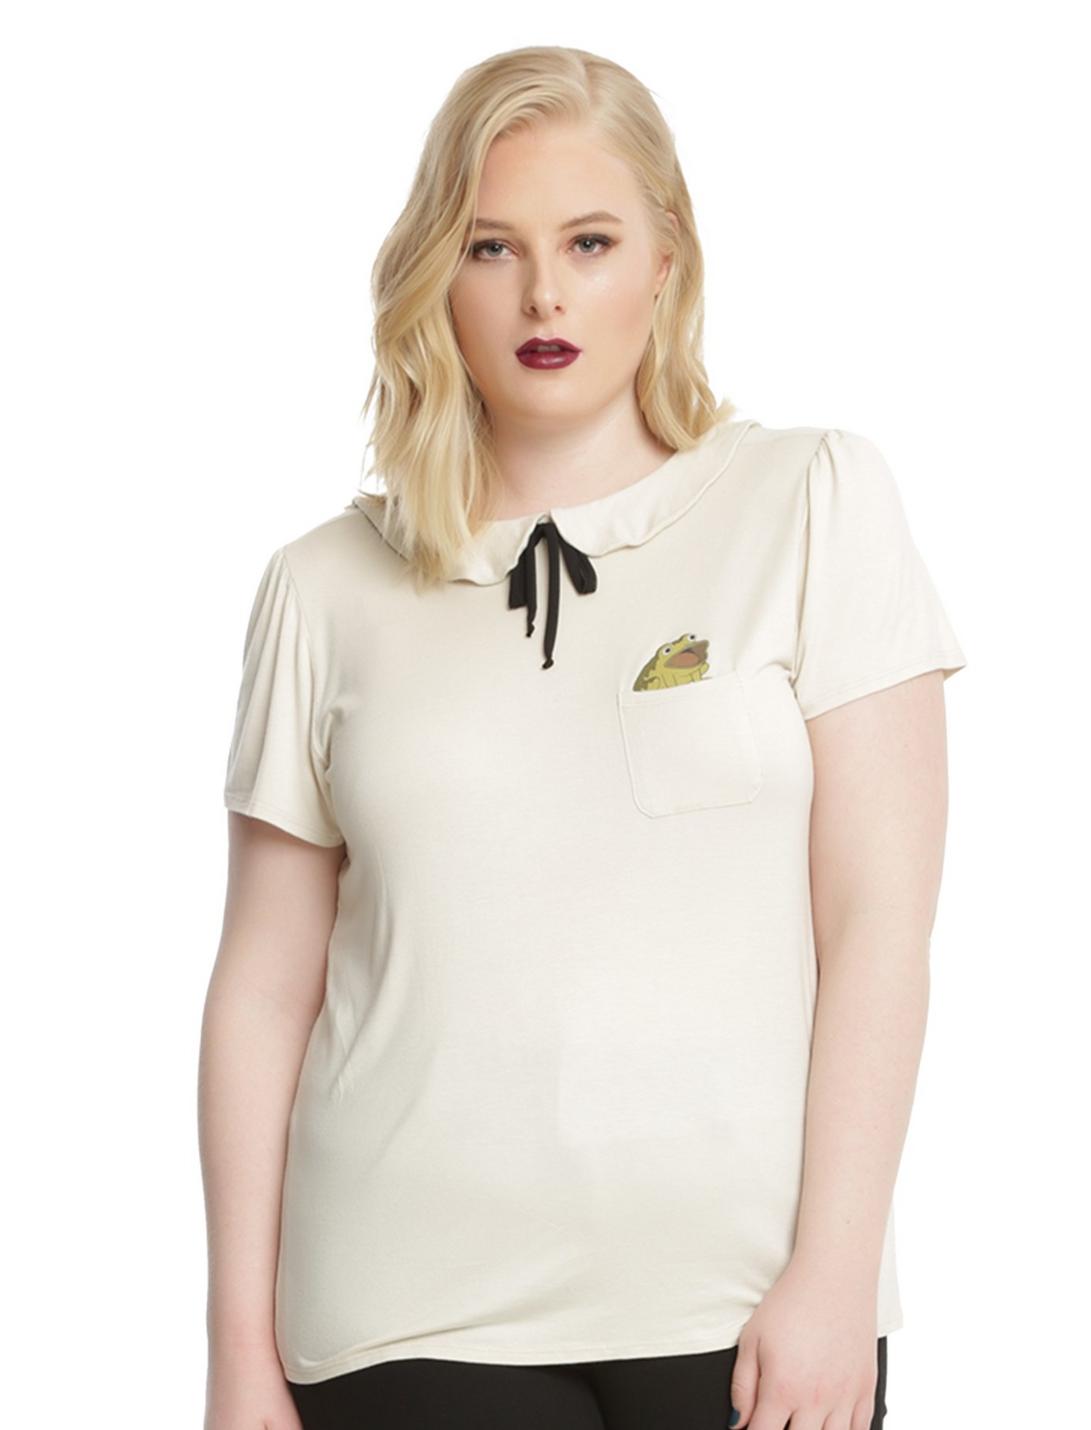 Over The Garden Wall Greg Frog Pocket Girls Top Plus Size, IVORY, hi-res